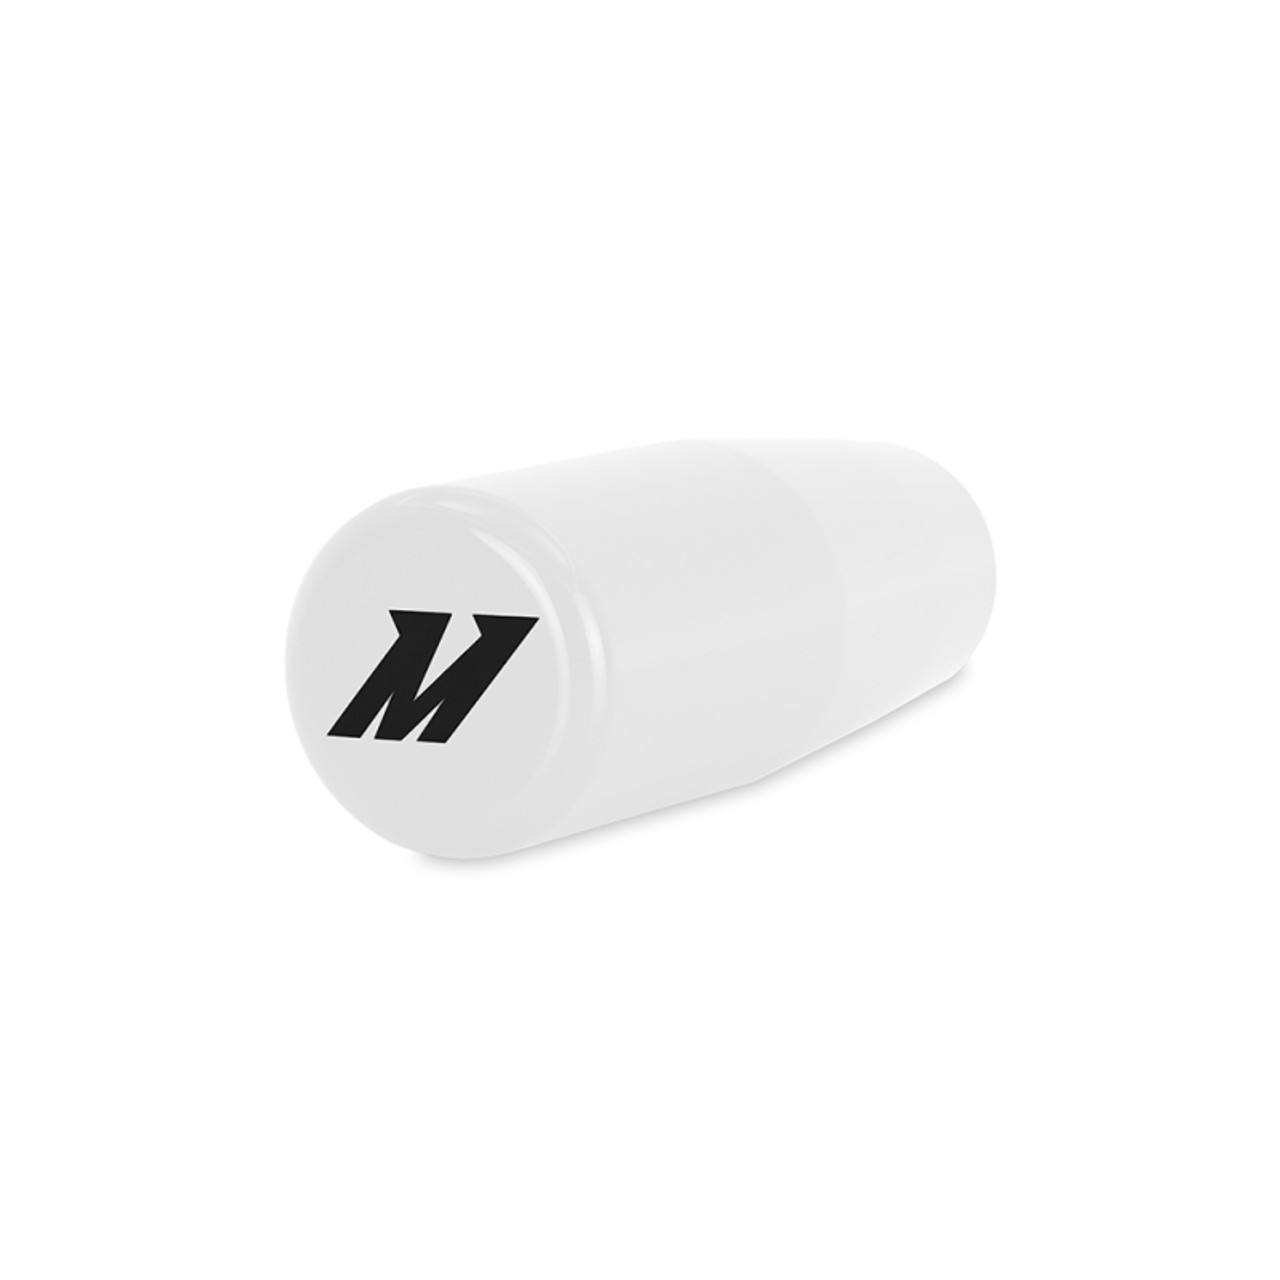 Mishimoto Weighted Shift Knob XL White - MMSK-XL-WH User 1